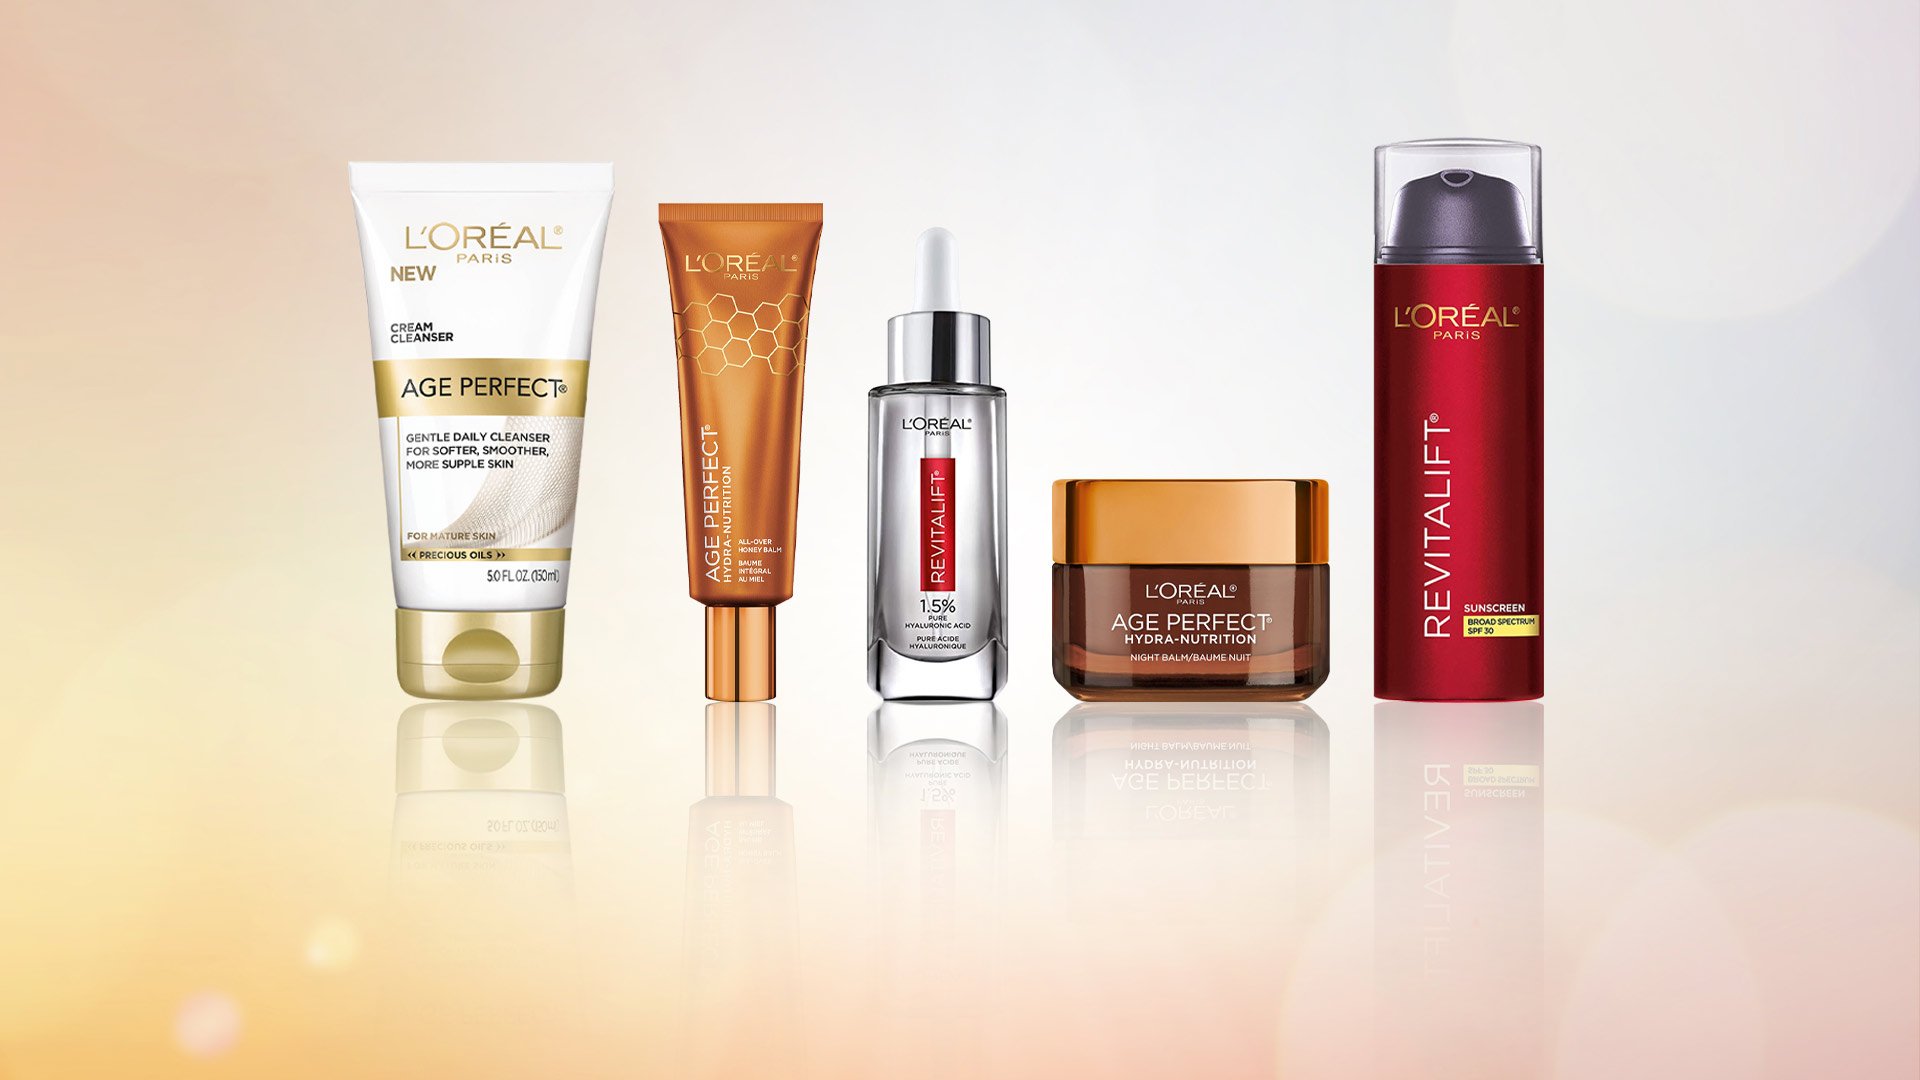 Loreal Paris Article The Best Anti Aging Skin Care Products For Your 40s D